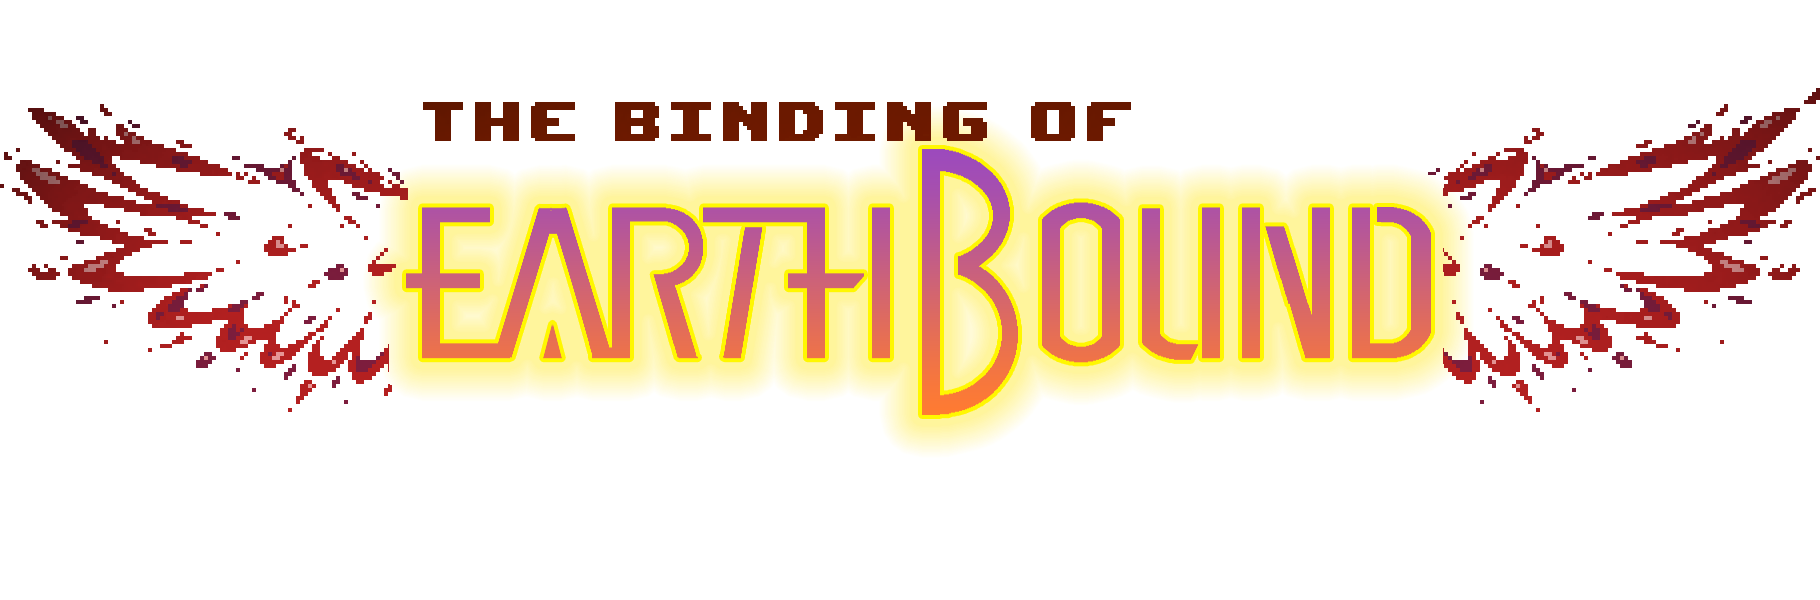 The Binding of EarthBound DEMO